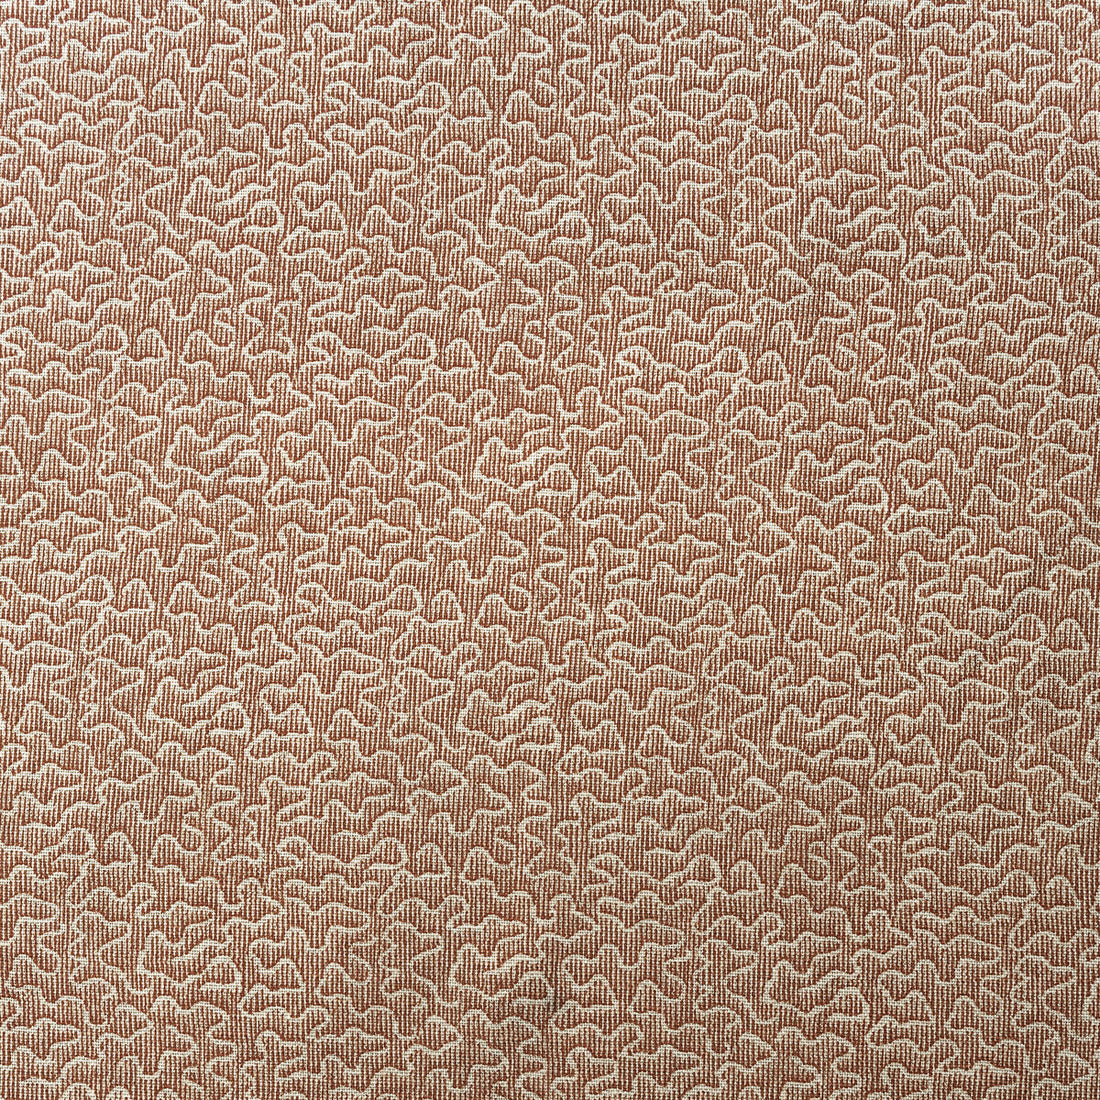 Pollen fabric in orange color - pattern AM100383.12.0 - by Kravet Couture in the Andrew Martin Garden Path collection